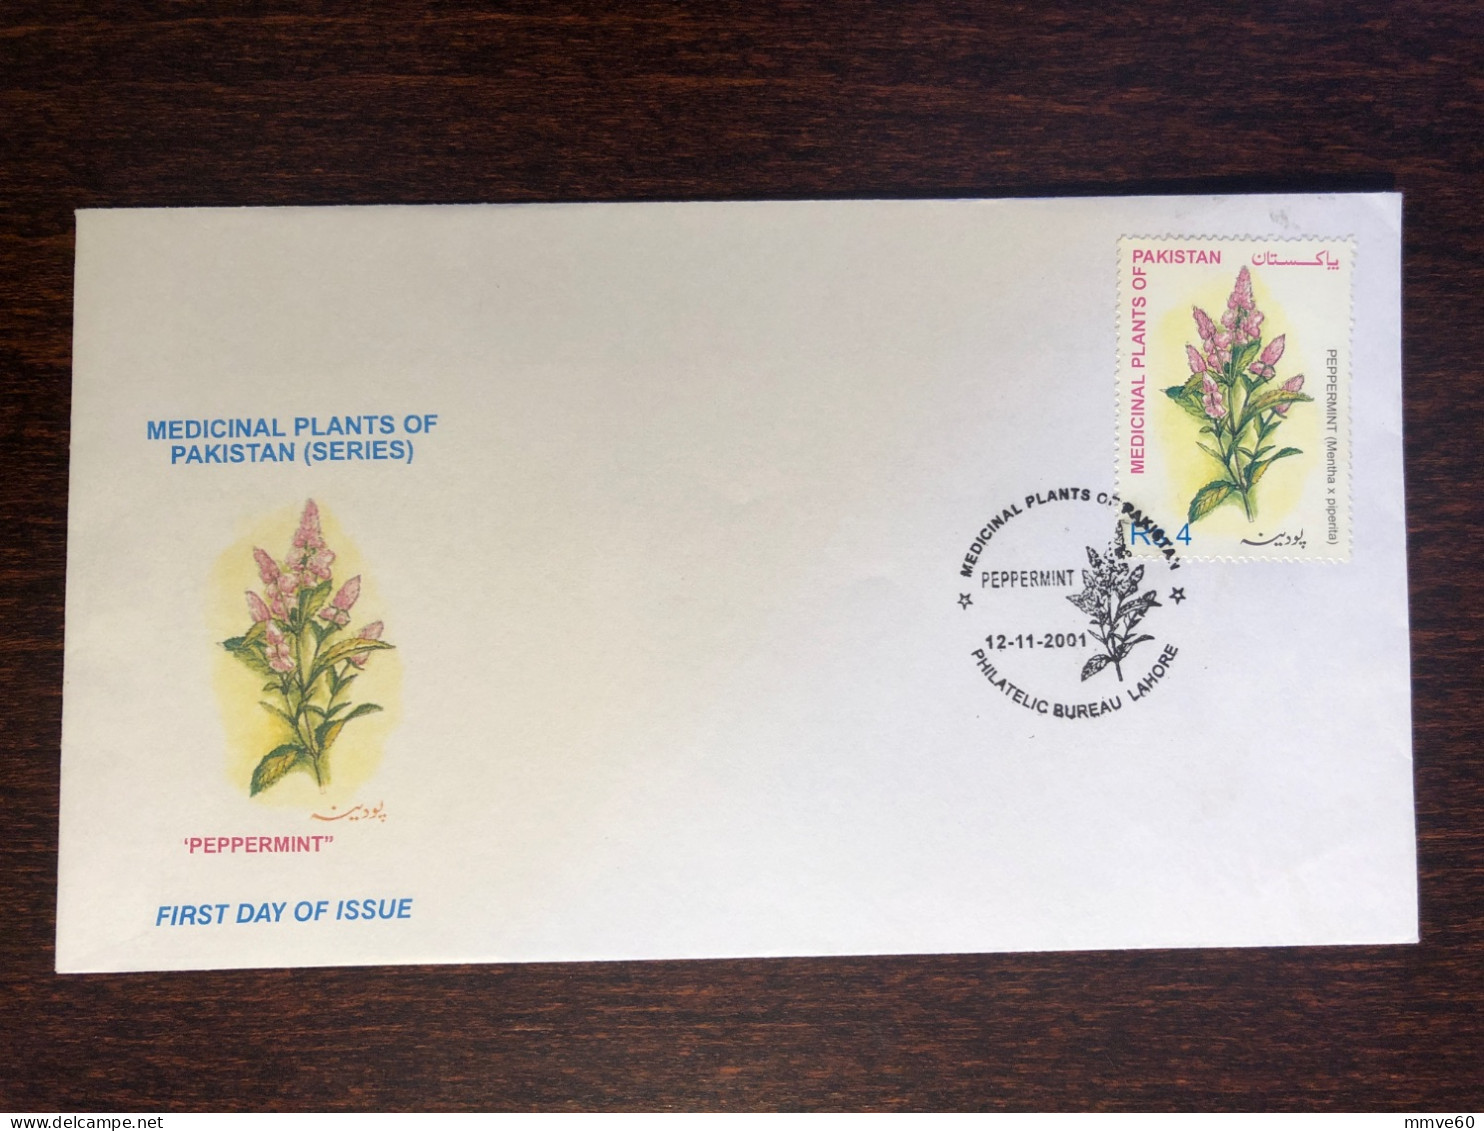 PAKISTAN FDC COVER 2001 YEAR MEDICINAL PLANTS HEALTH MEDICINE STAMPS - Pakistan